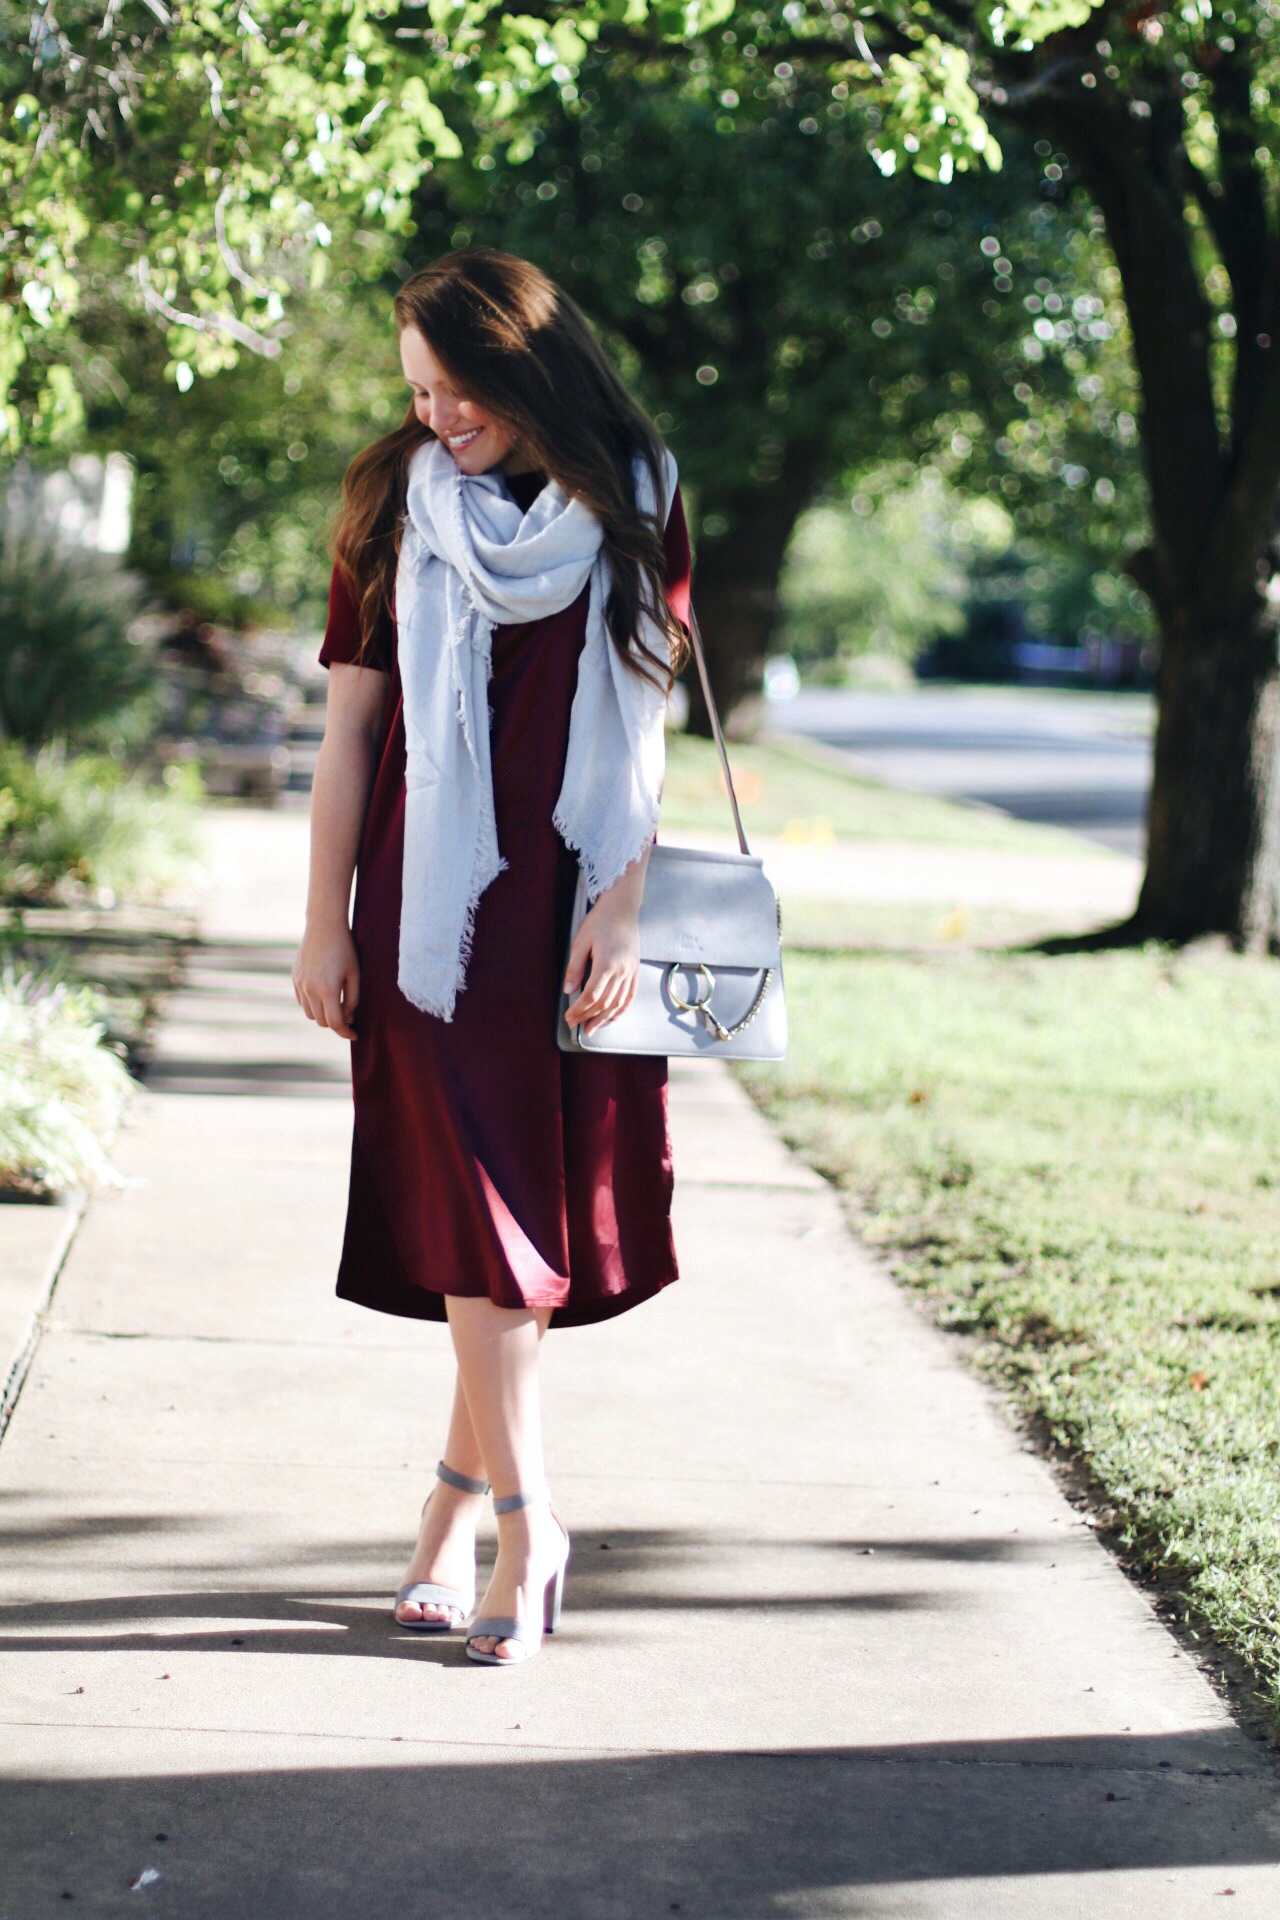 A Classy Holiday Outfit | Nicole Arnold on @ShesIntentional